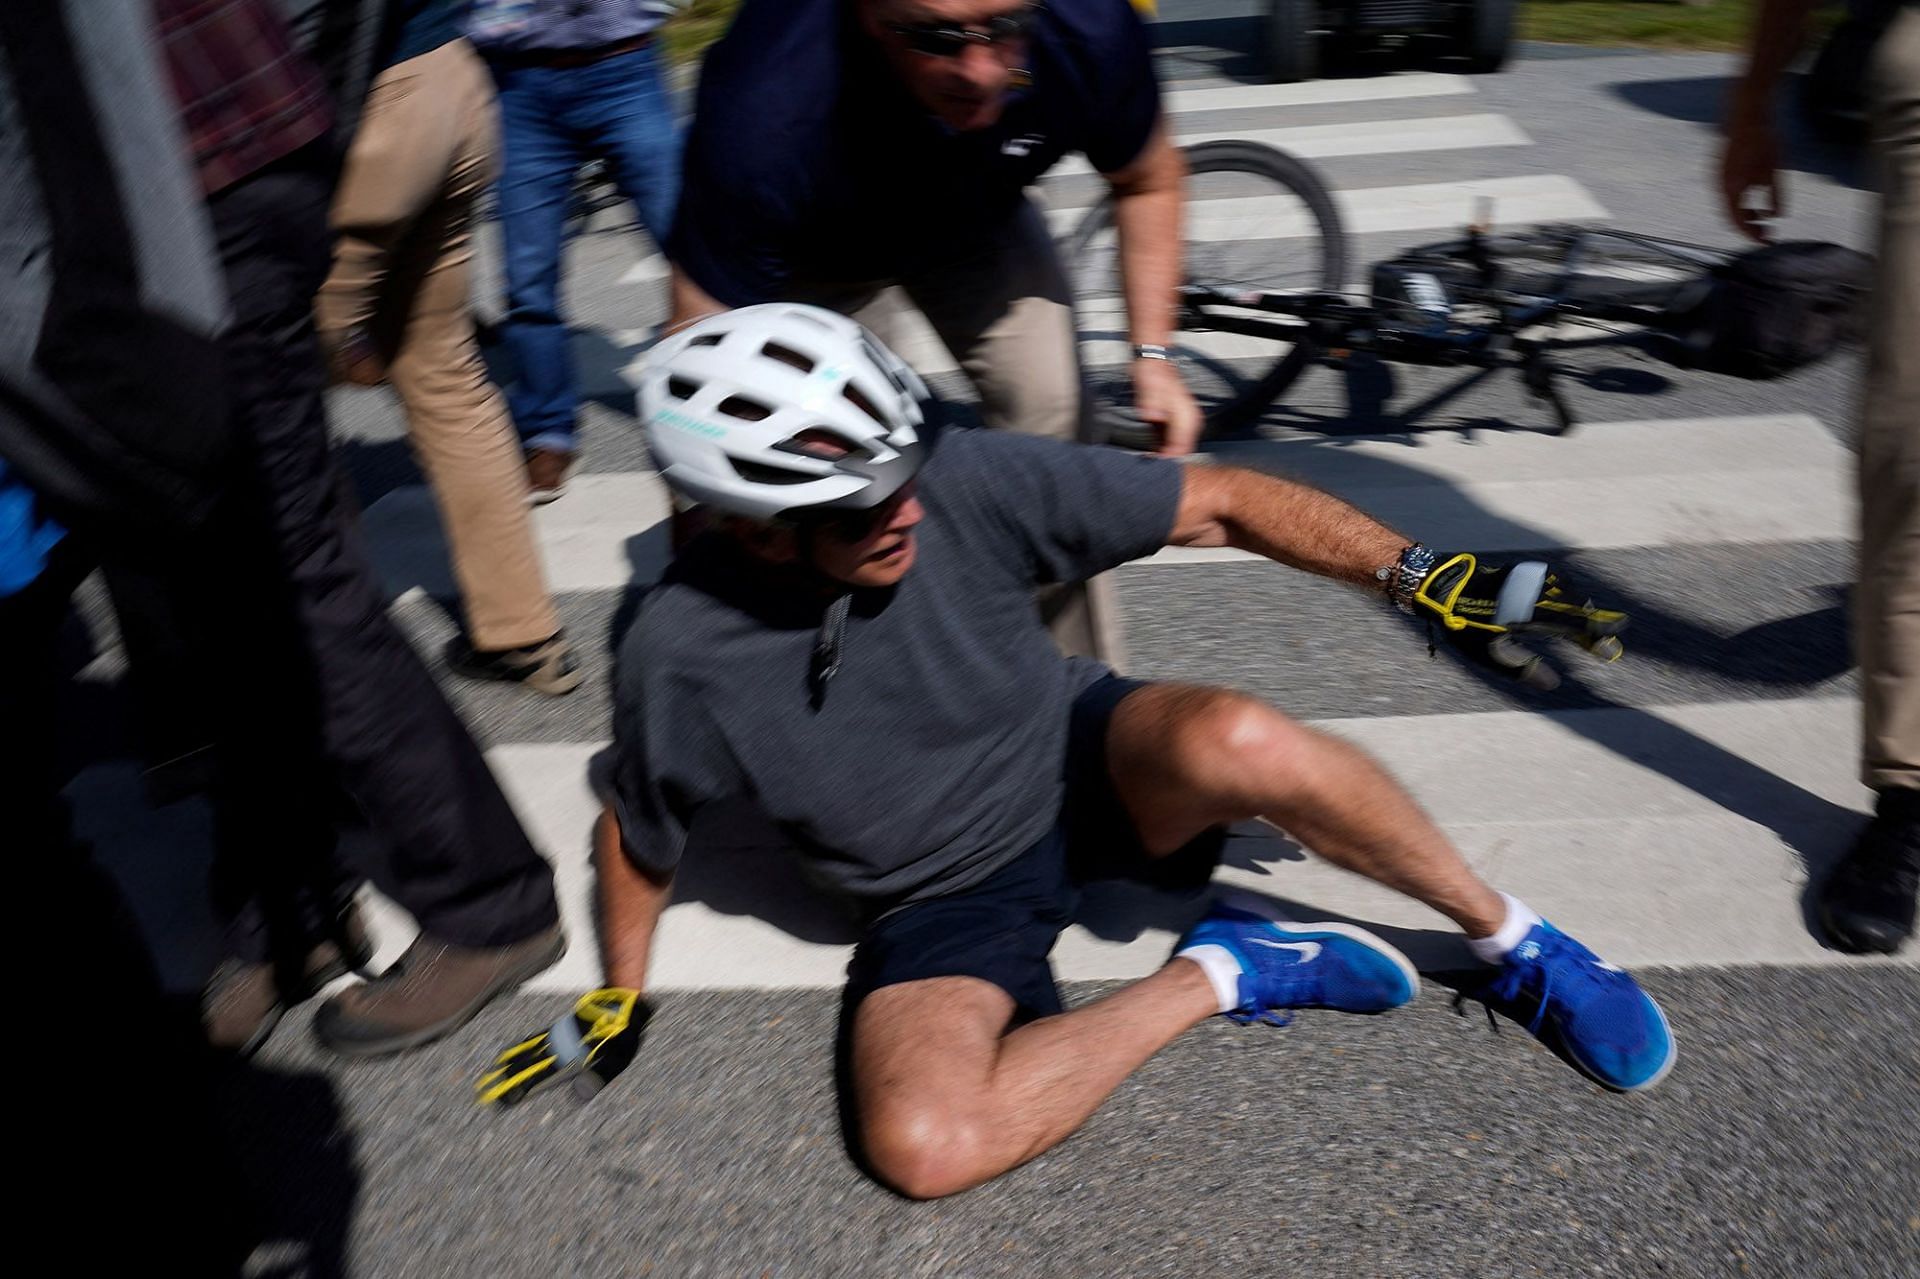 President Biden on the pavement after his fall. Source: Reuters